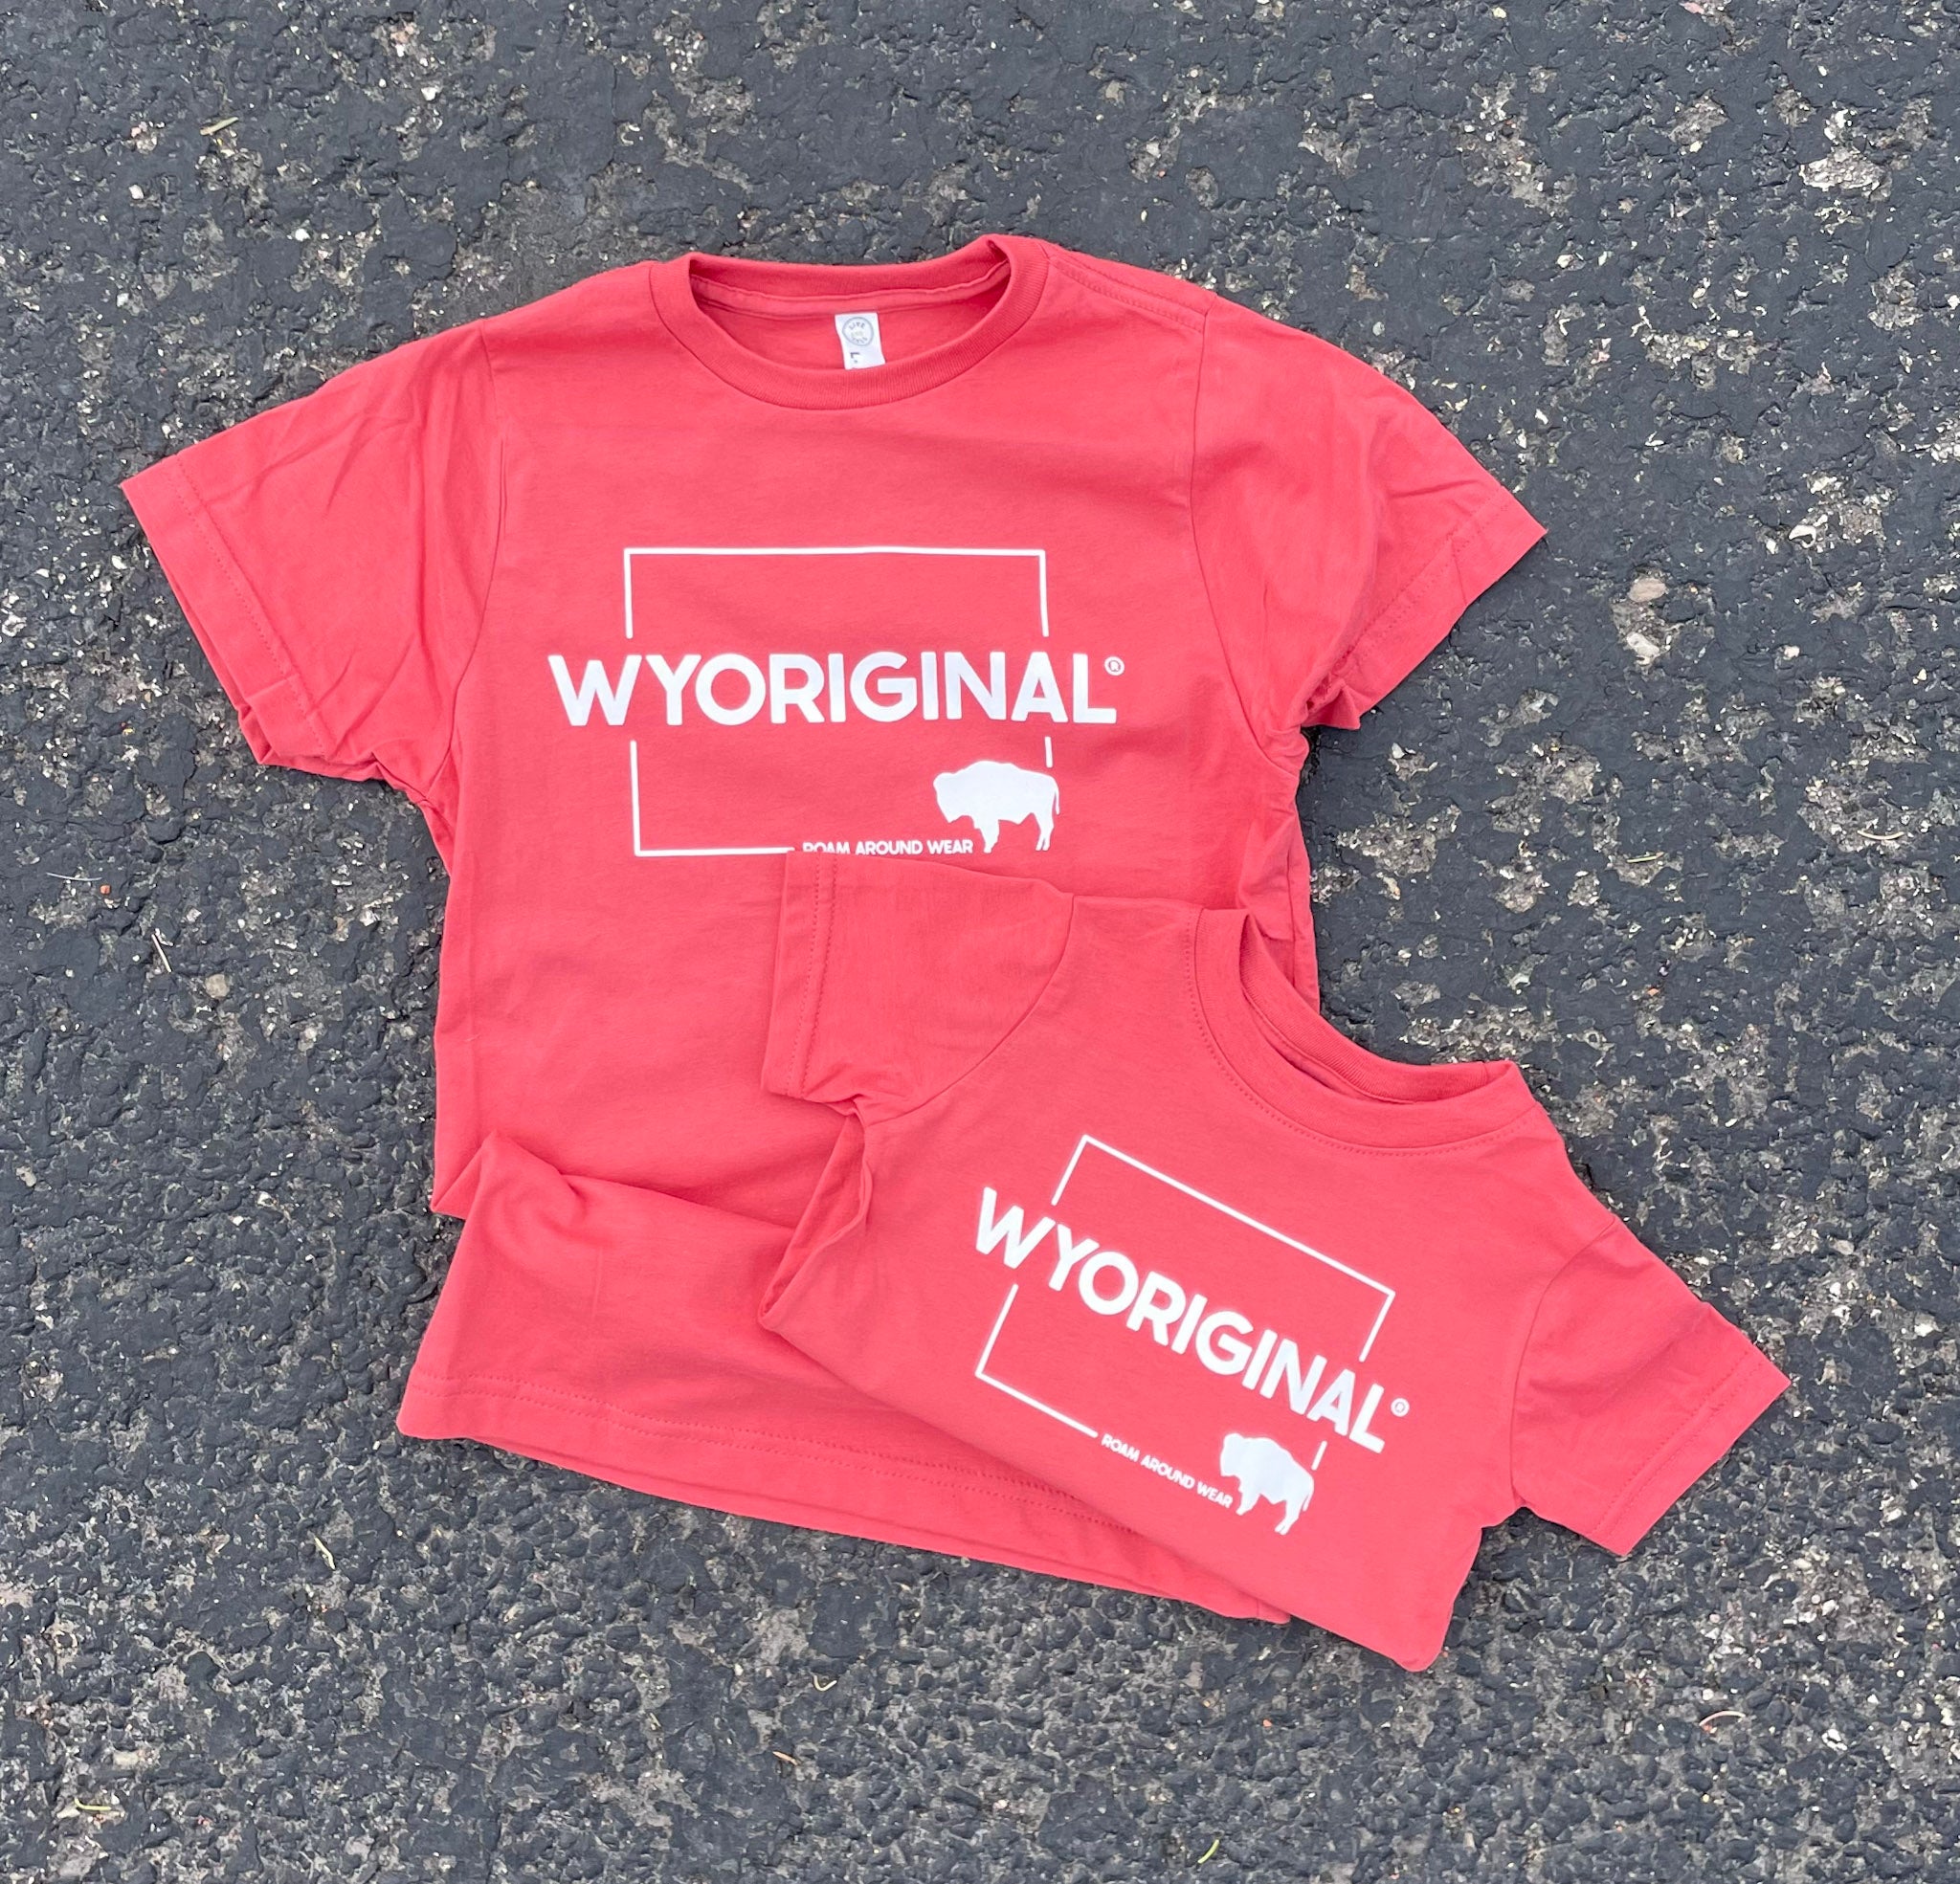 Wyoriginal Square State design in white on red/orange shirt. Roam Around Wear is a women owned Wyoming T-Shirt company based out of Gillette, Wyoming.